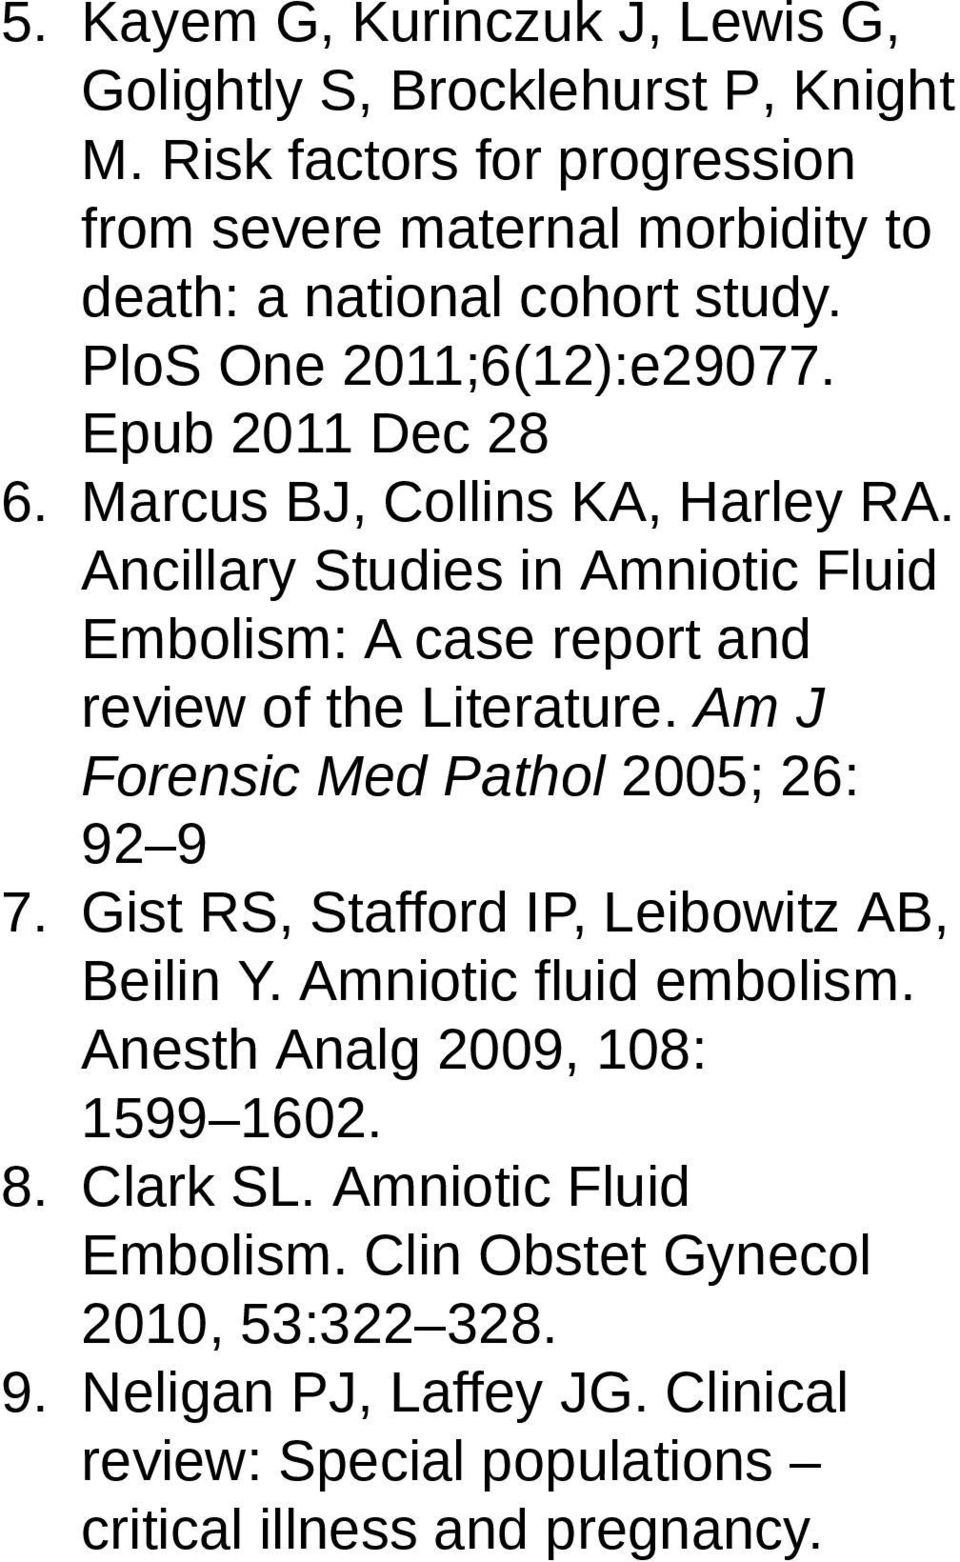 Marcus BJ, Collins KA, Harley RA. Ancillary Studies in Amniotic Fluid Embolism: A case report and review of the Literature.